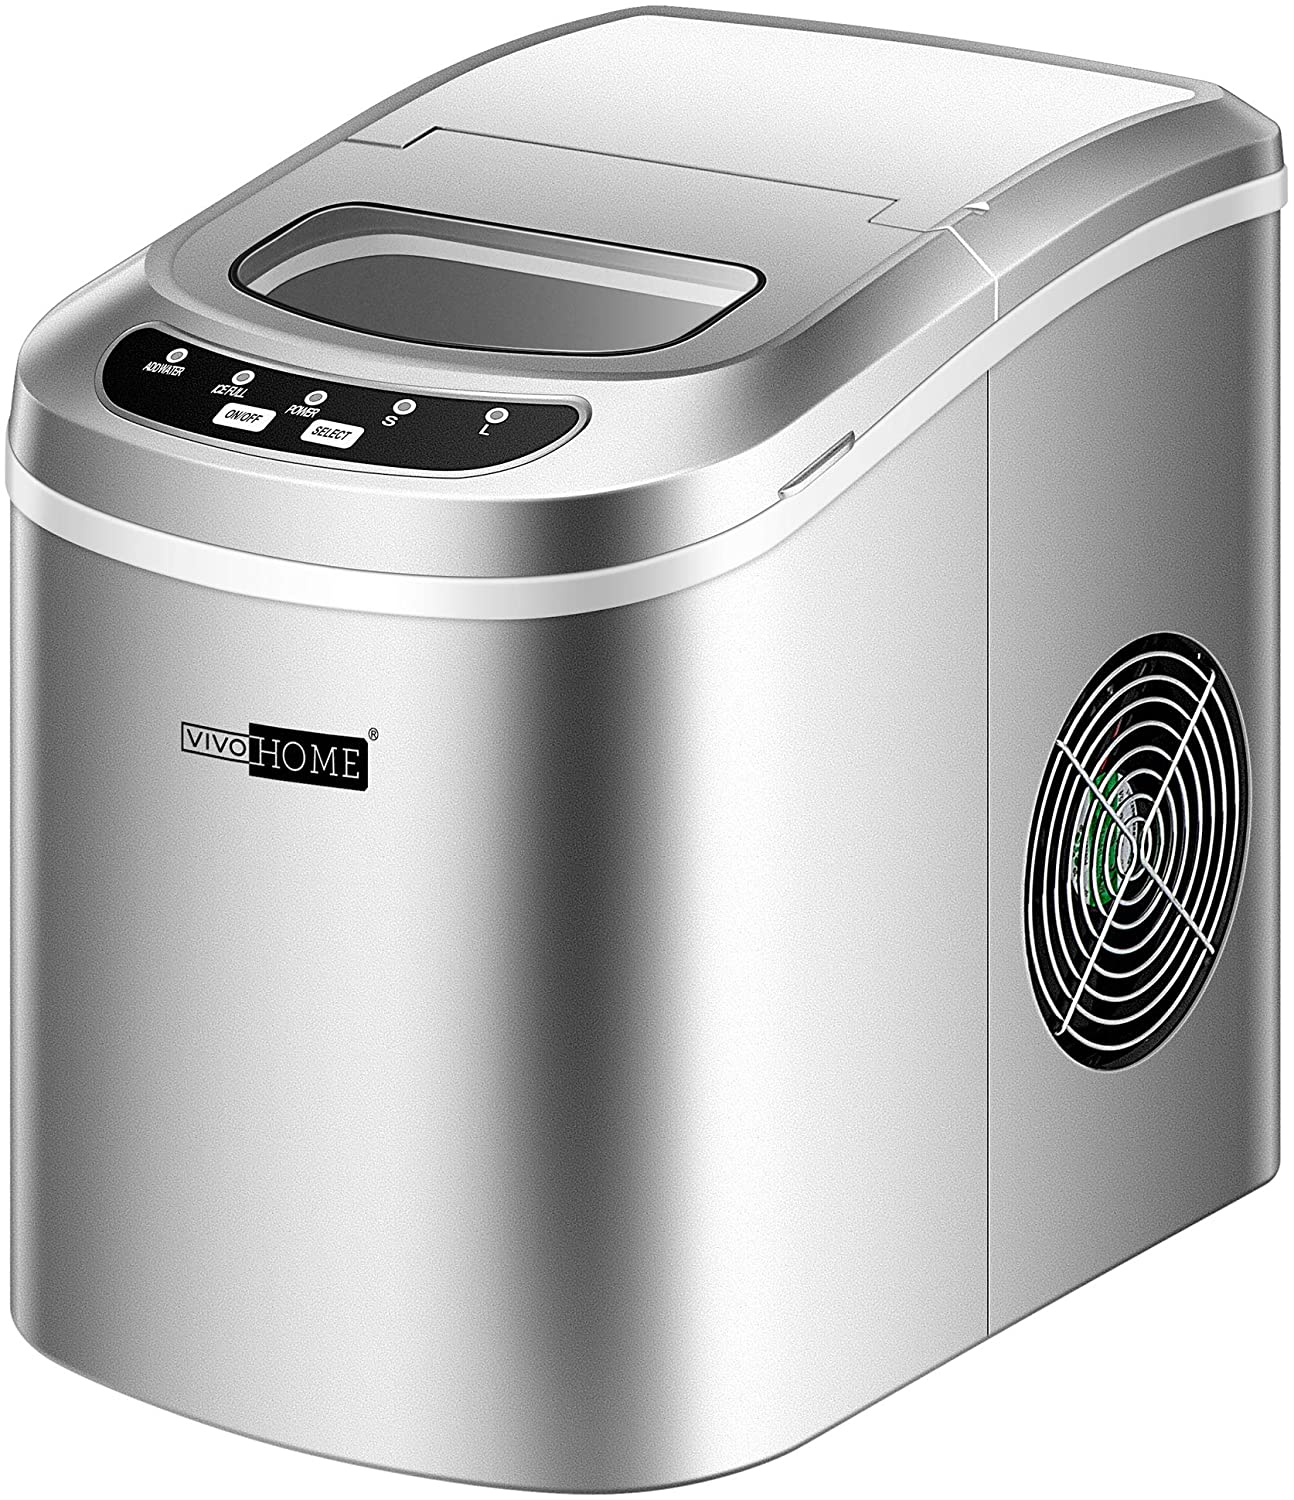 Photo 1 of VIVOHOME Electric Portable Compact Countertop Automatic Ice Cube Maker Machine 26lbsday Silver